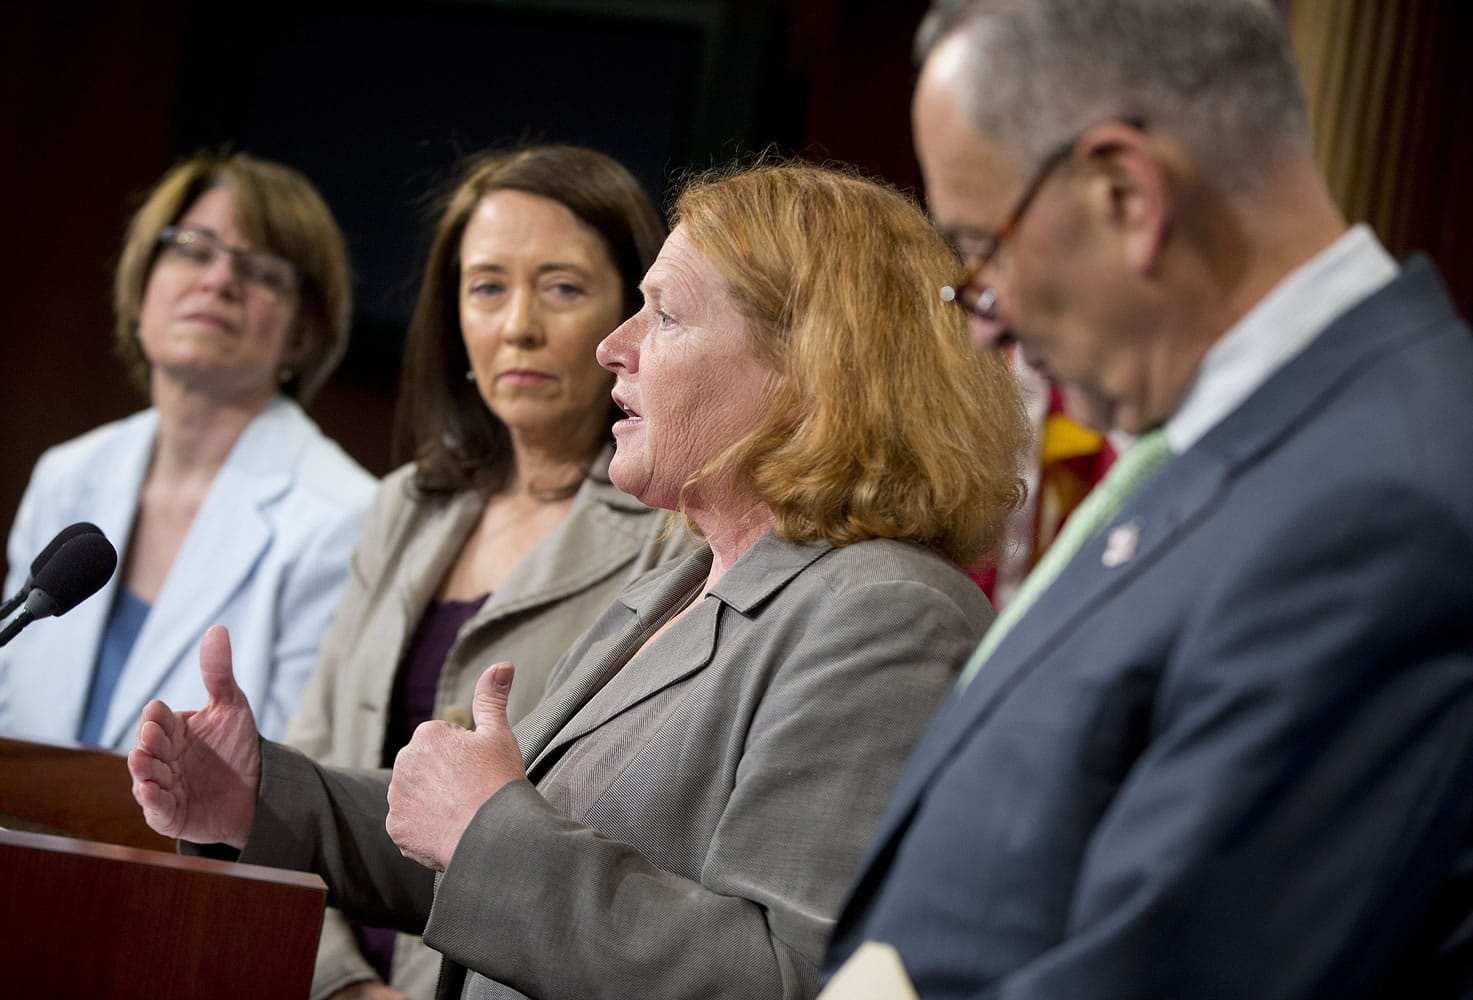 From left, Sen. Amy Klobuchar, D-Minn.; Sen. Maria Cantwell, D-Wash.; Sen. Heidi Heitkamp, D-N.D.; and Sen. Charles Schumer, D-NY., participate in a news conference Thursday on Capitol Hill in Washington.